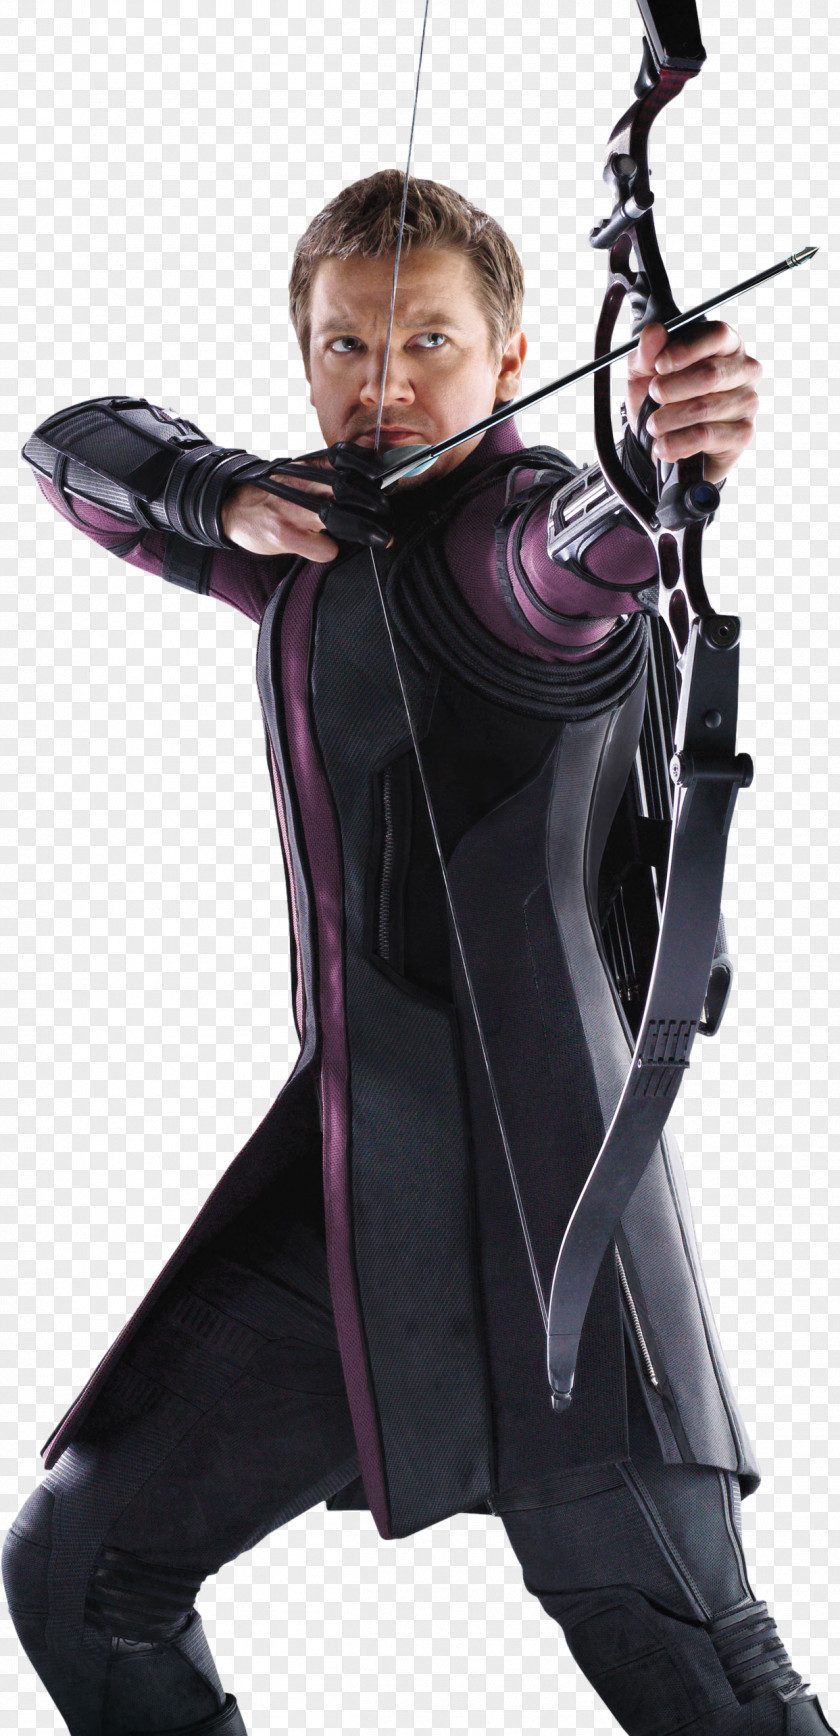 Download Hawkeye Icon Jeremy Renner Clint Barton Black Widow Iron Man Avengers: Age Of Ultron PNG